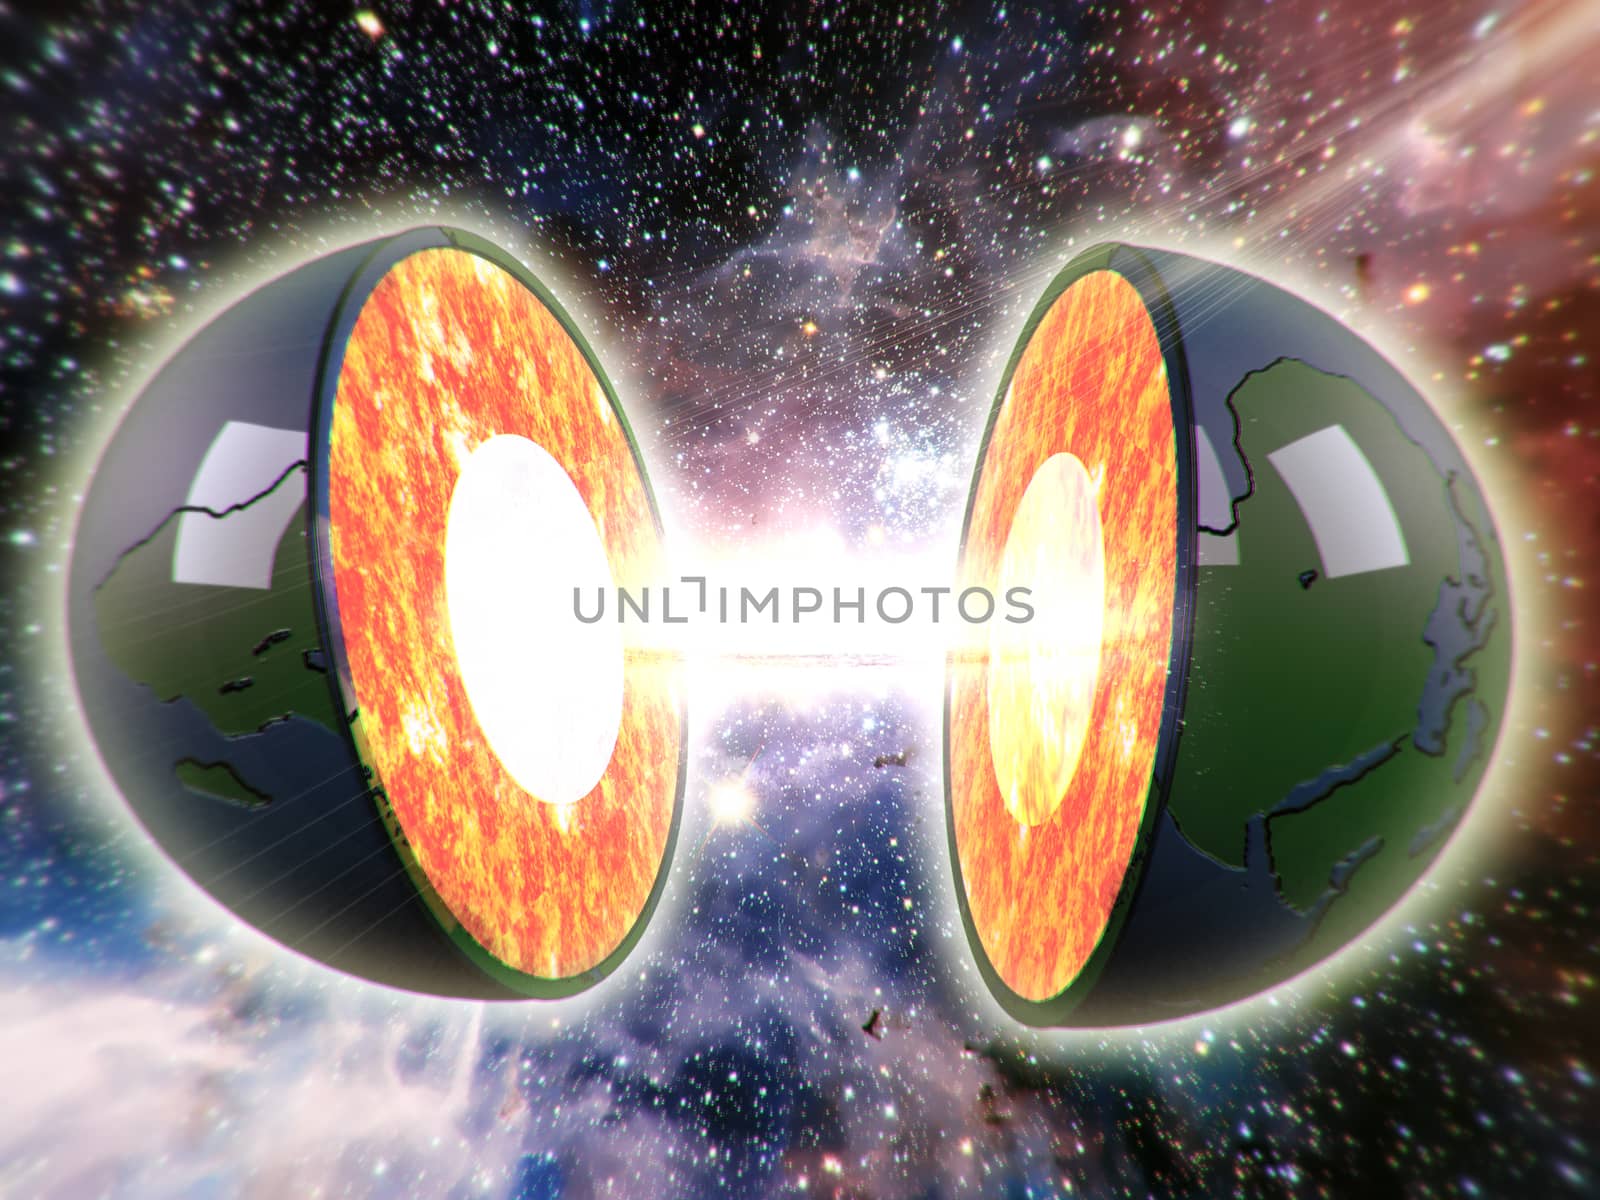 illustration of a sliced earth and an explosion in the middle 3d effect